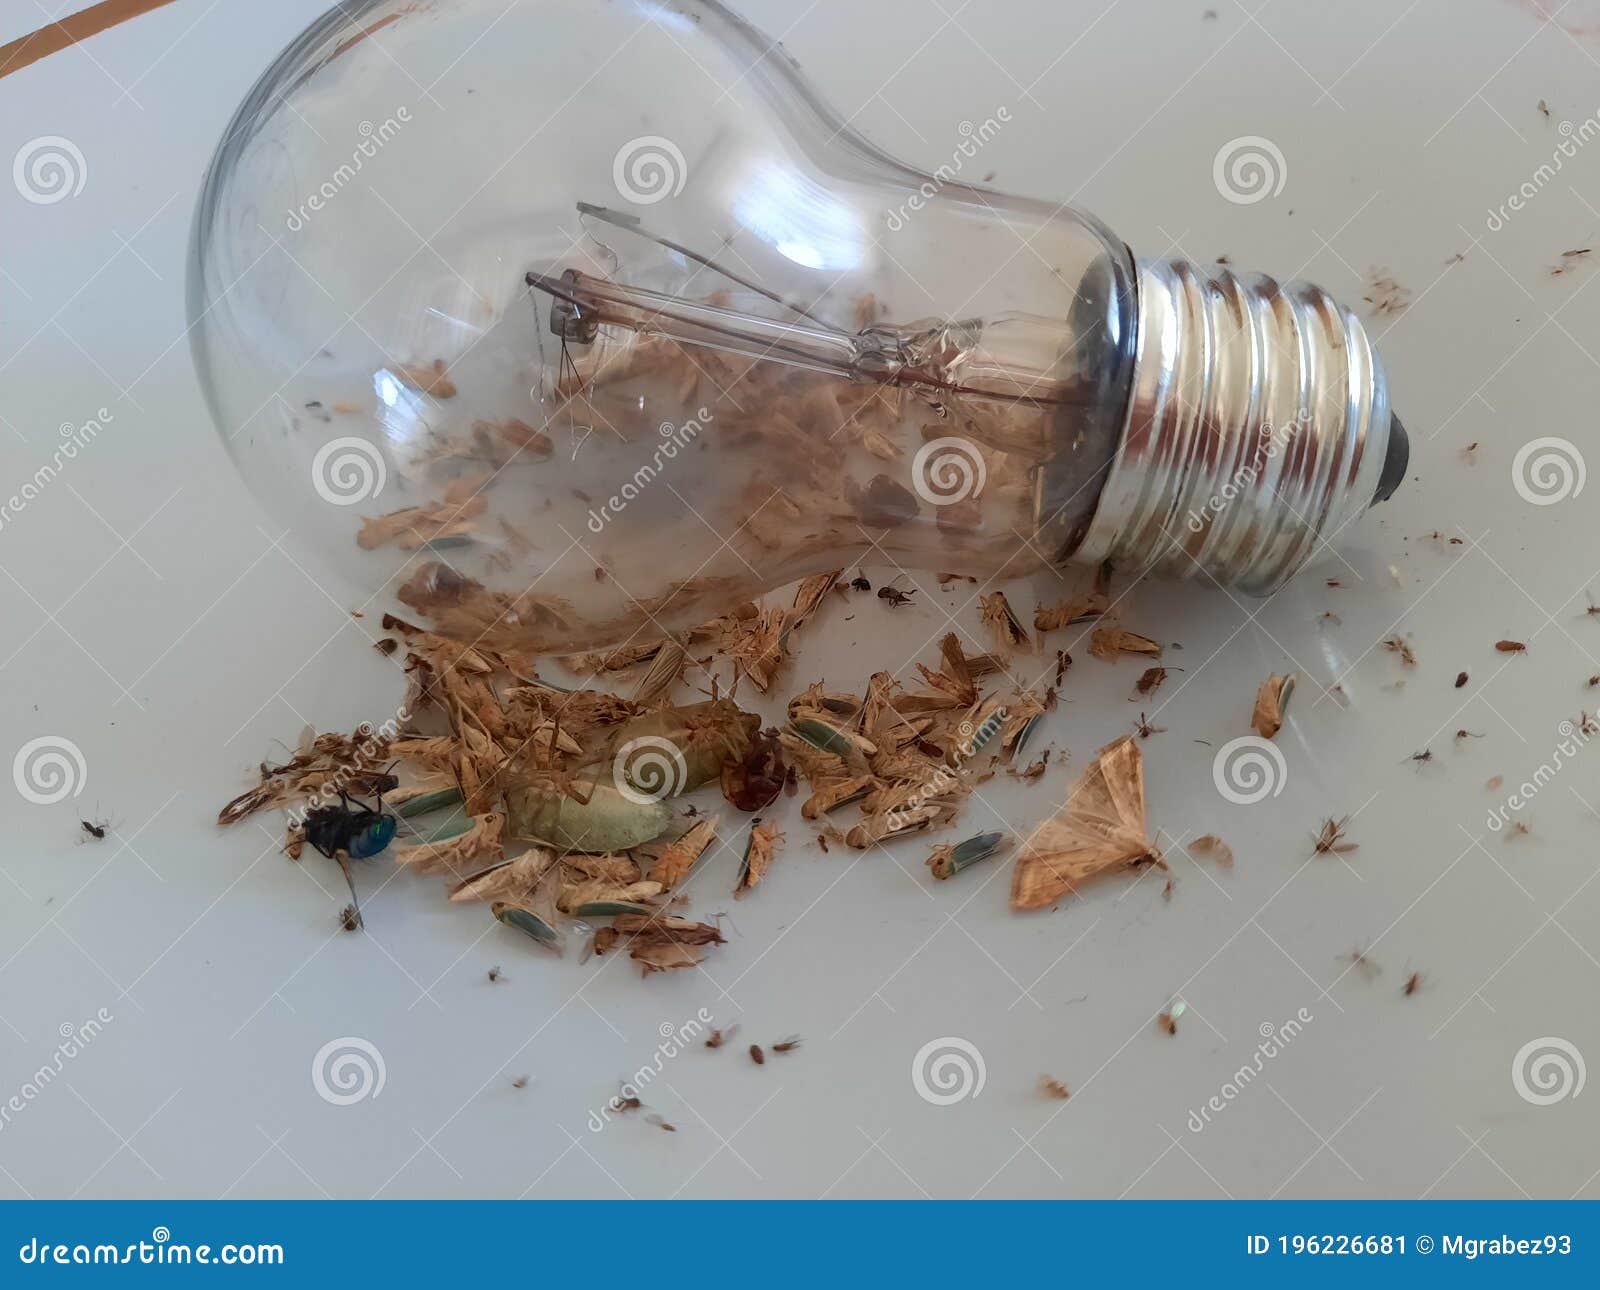 dræne Mitt lade Light bulb and insects stock image. Image of bulb, fixtures - 196226681